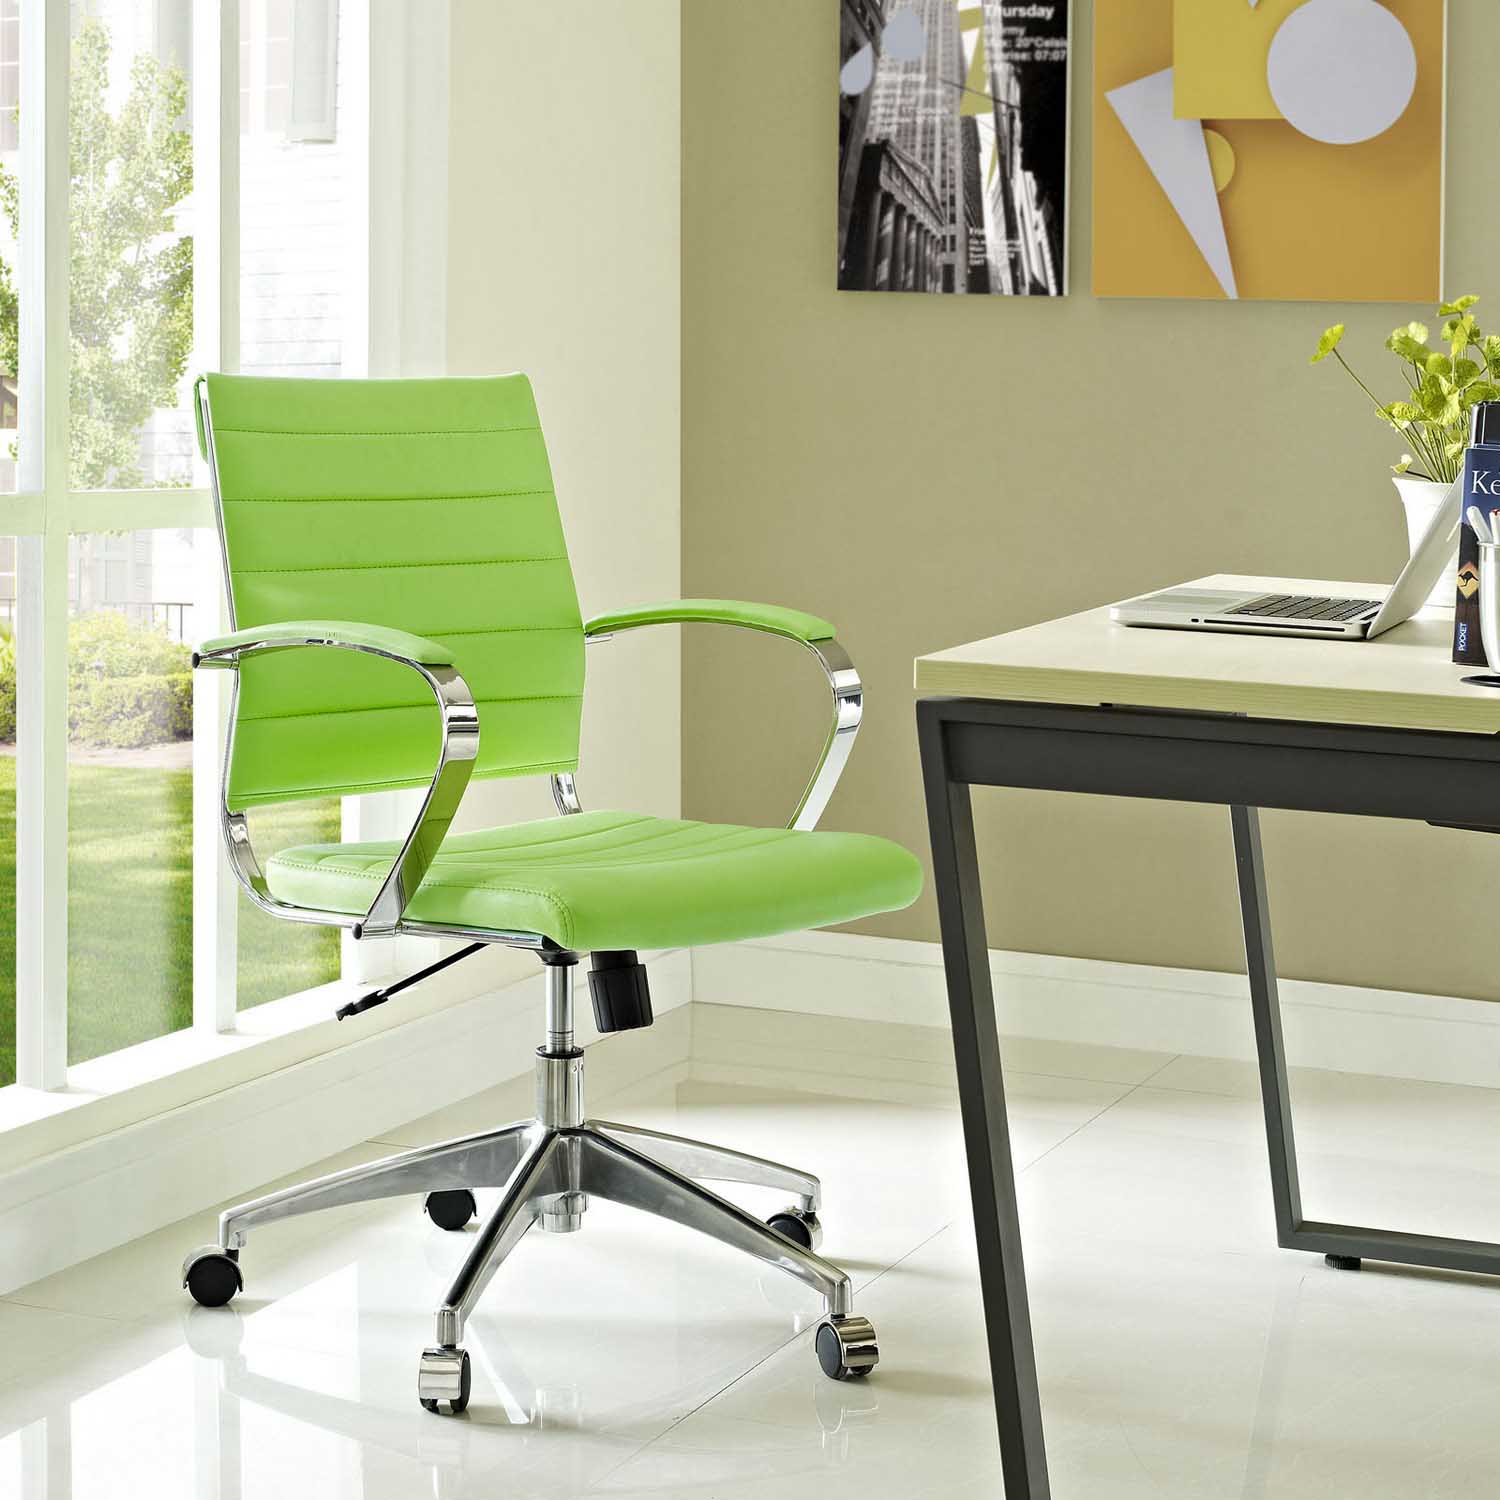 Modway Jive Mid Back Office Chair - Bright Green